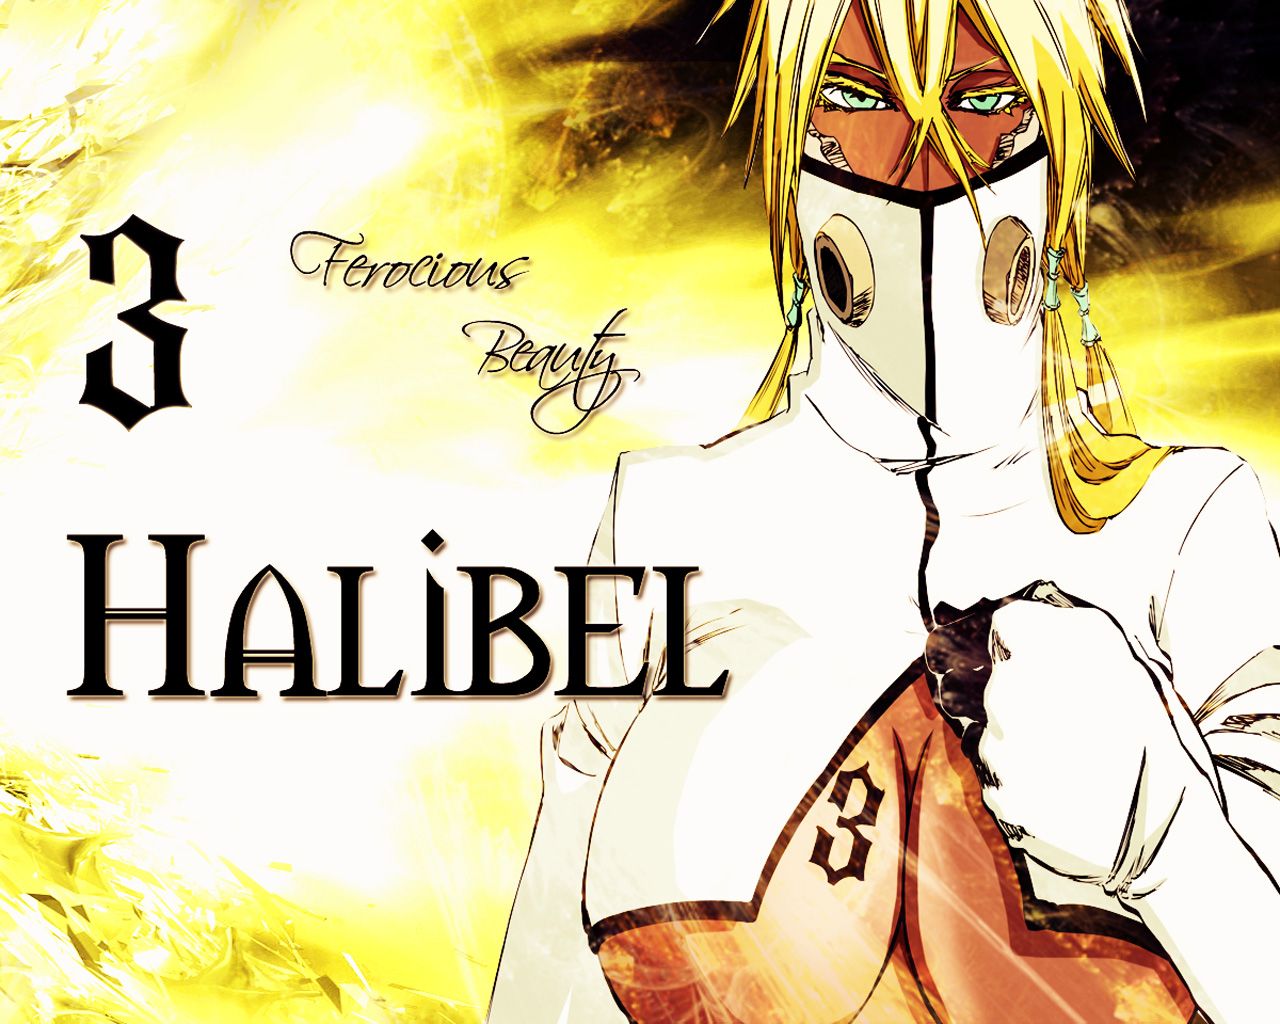 Download wallpapers from anime Bleach with tags: Free, Tier Halibel.